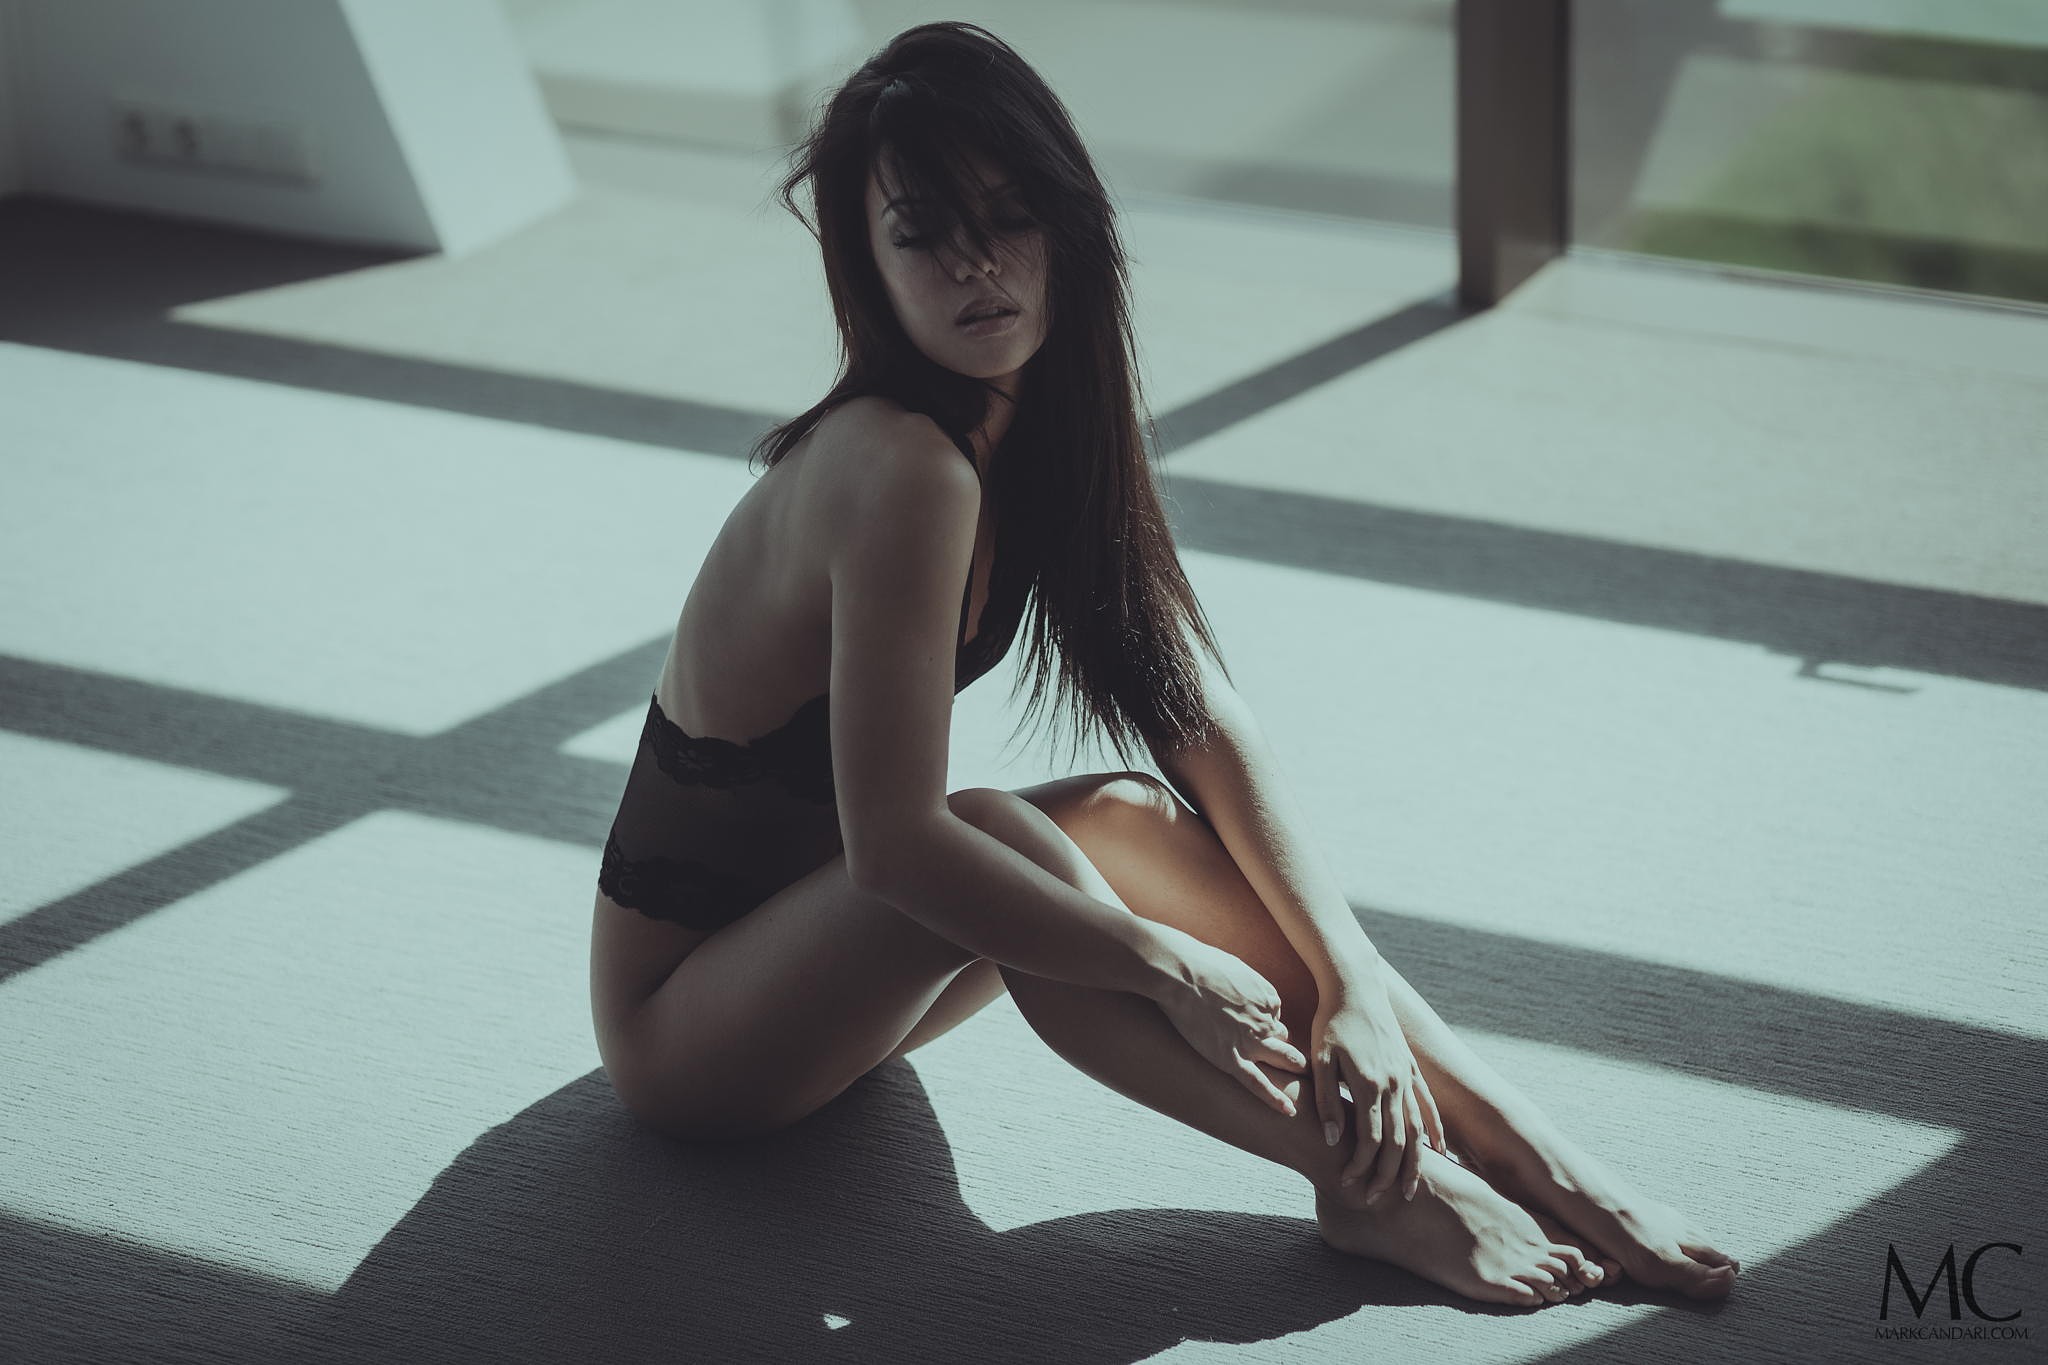 People 2048x1365 Mark Candari women model brunette legs feet sitting on the floor lingerie black lingerie corset bare shoulders barefoot long hair closed eyes hand on leg hair in face parted lips partially clothed women indoors indoors bottomless